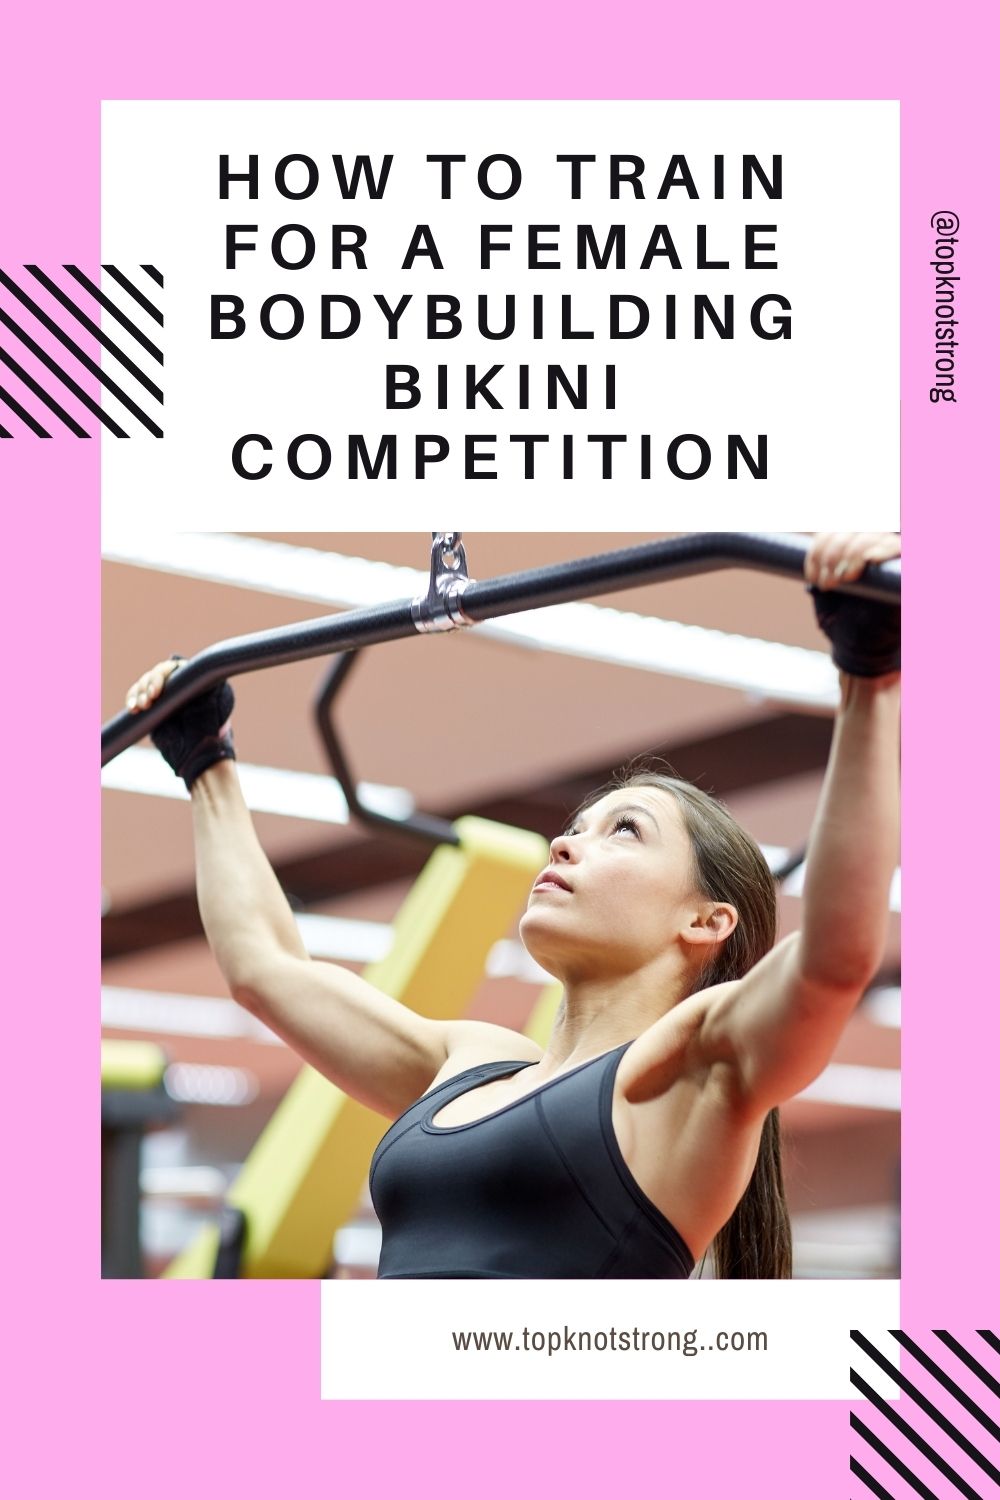 How to train for a female bodybuilding competition